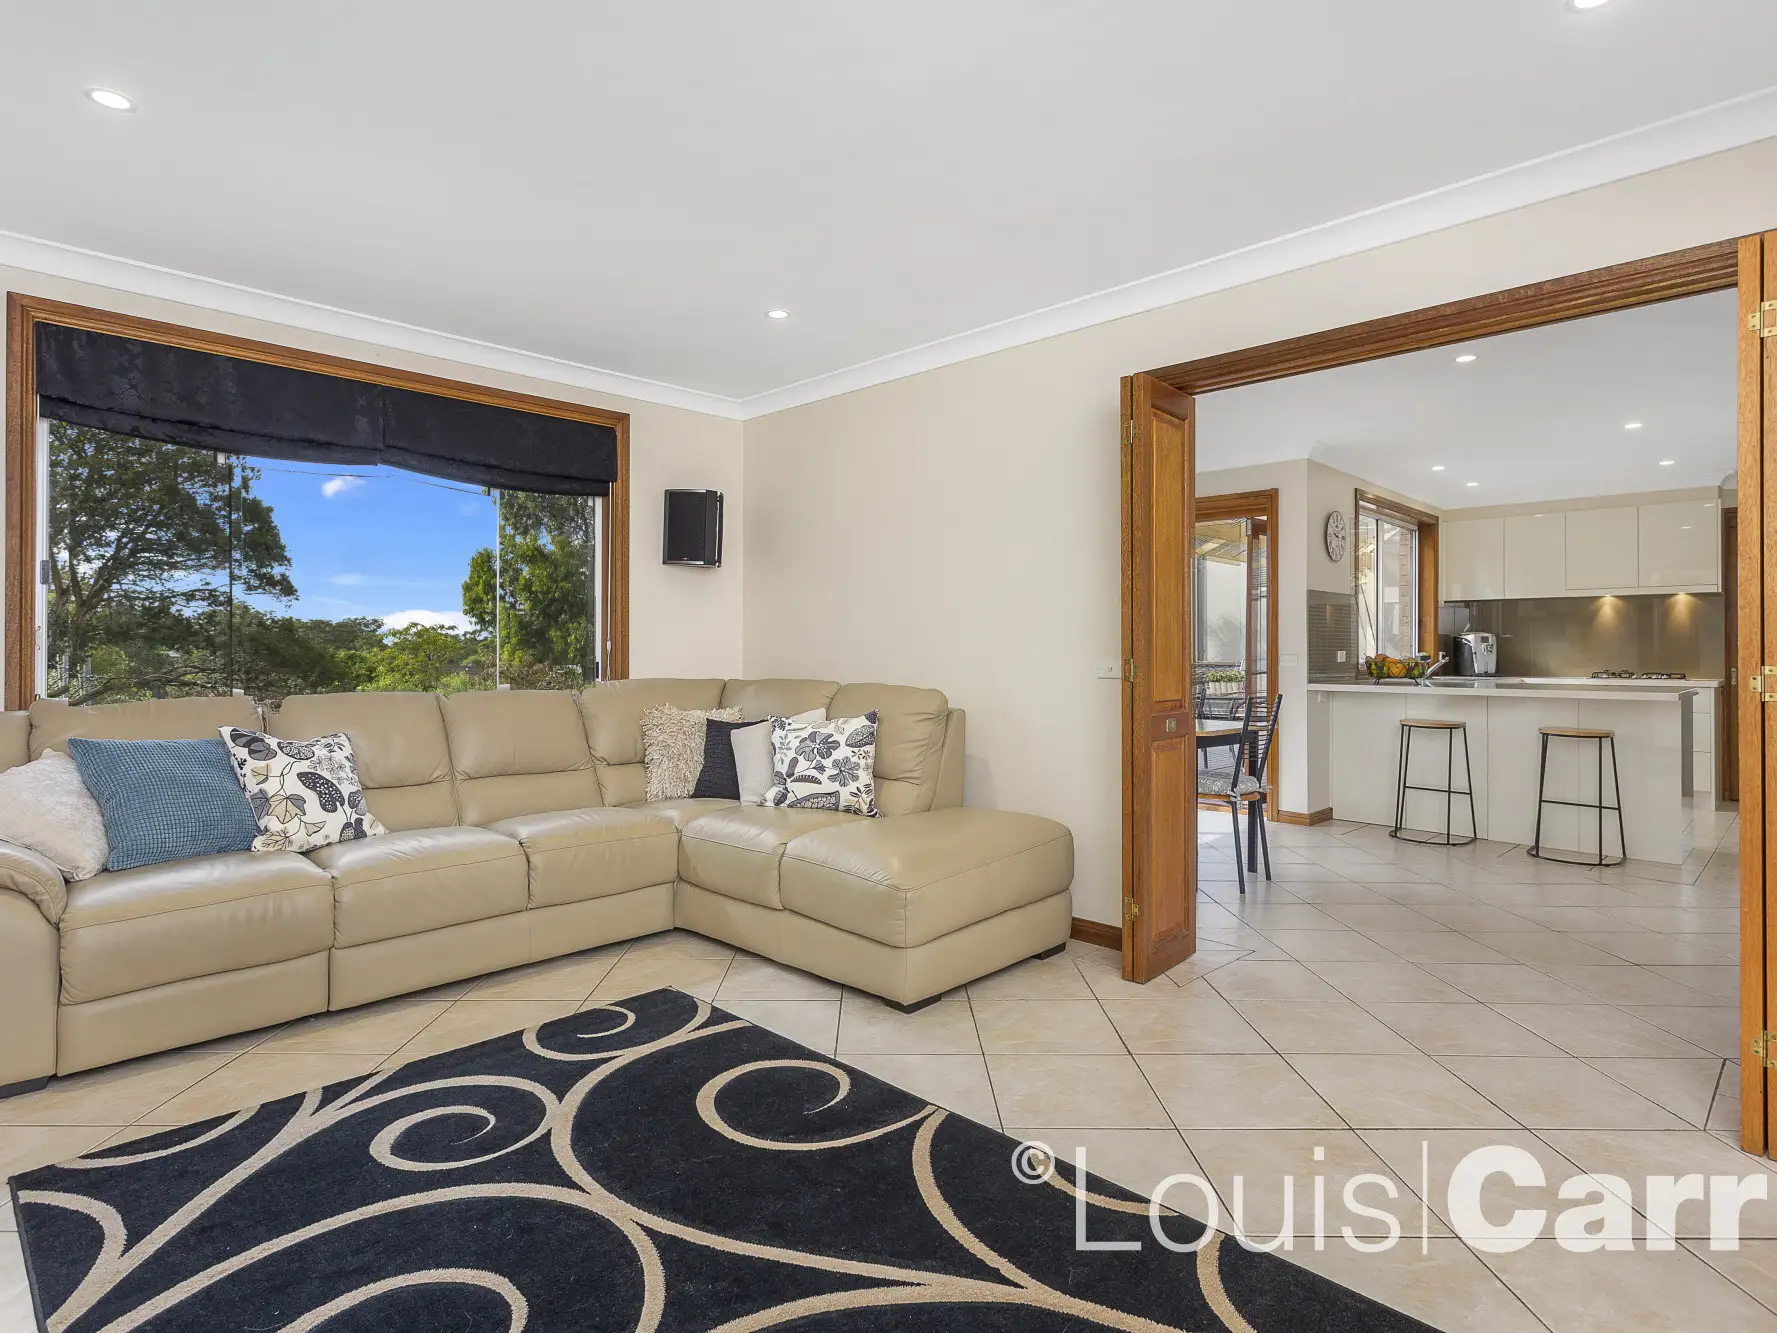 Photo #7: 6 Pineview Place, Dural - Sold by Louis Carr Real Estate